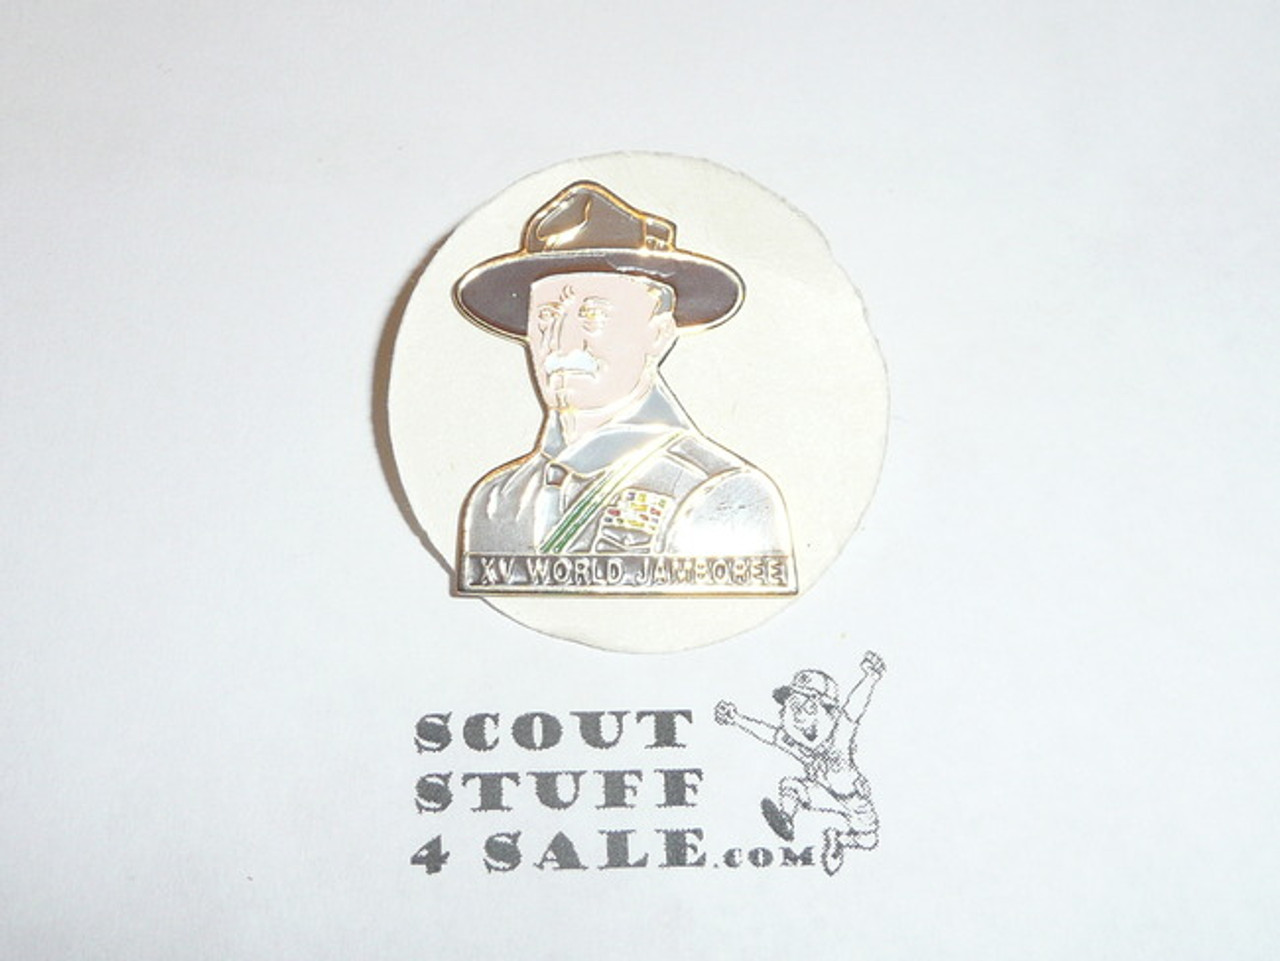 Enameled Baden Powell Bust Pin with 15th World Jamboree on it